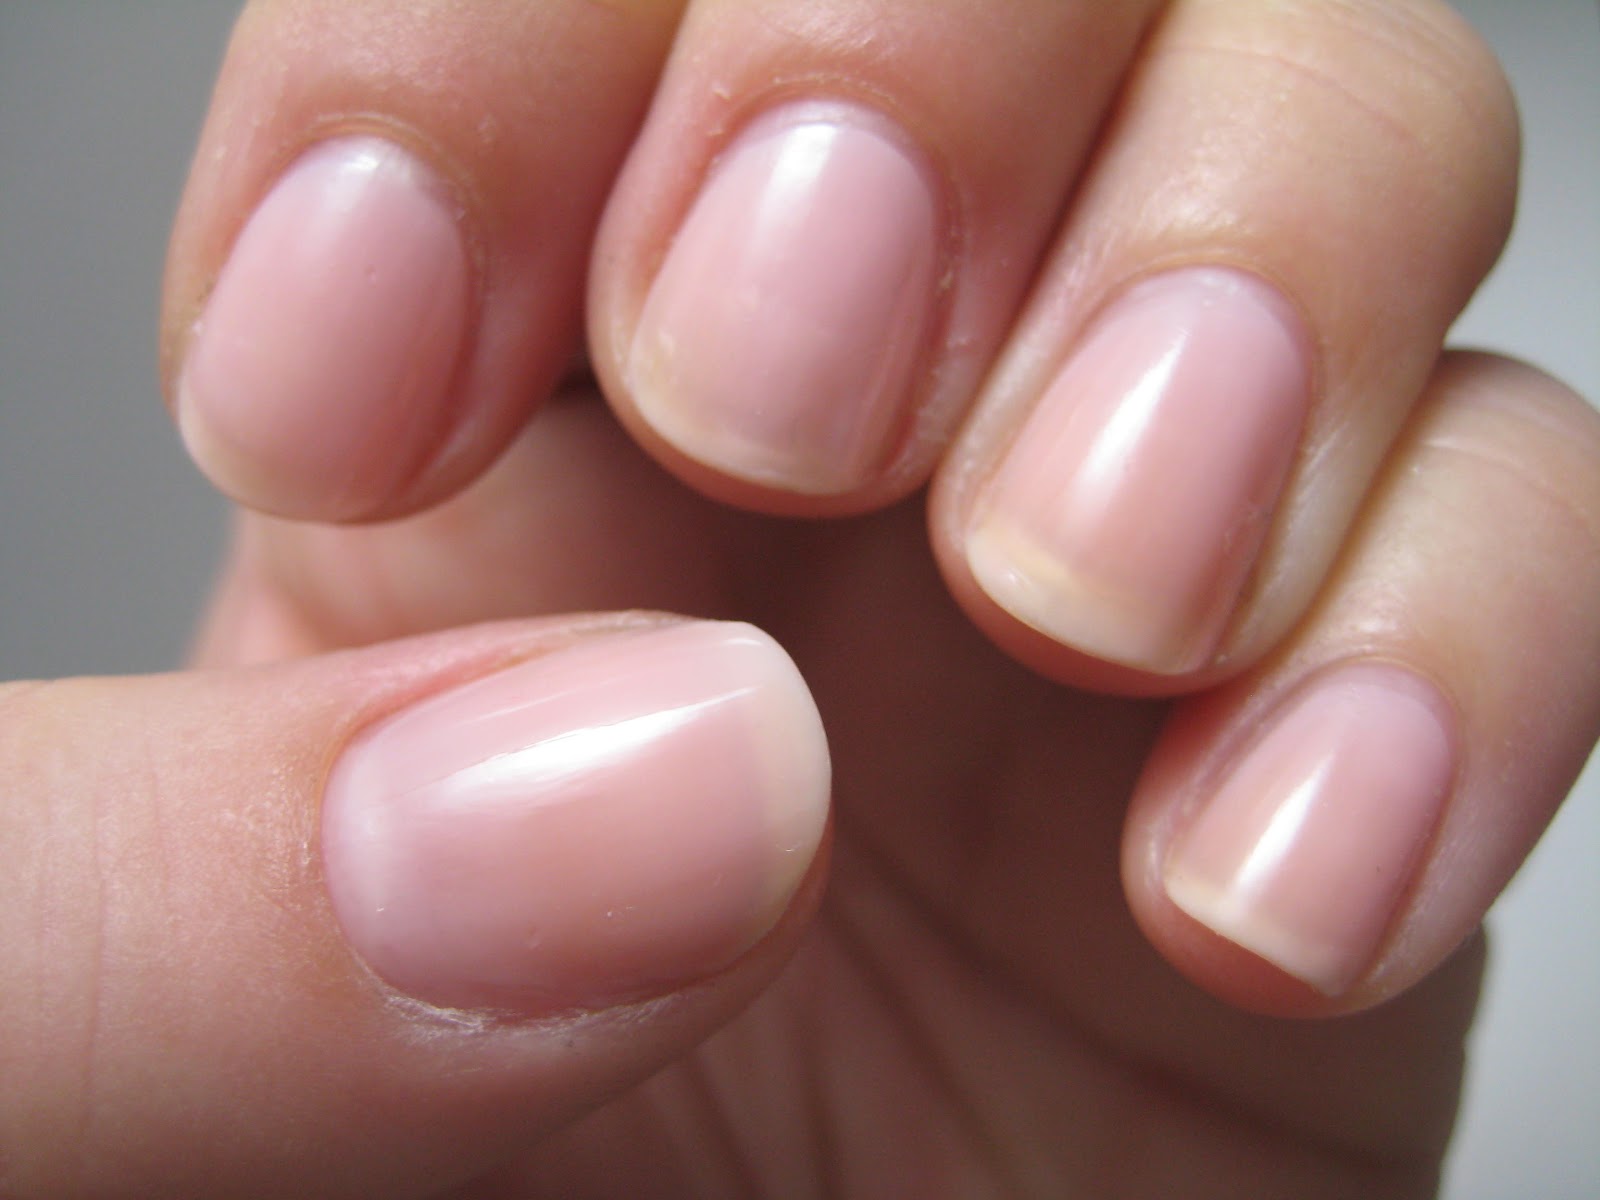 5. Lovely Nails & Beauty - wide 10